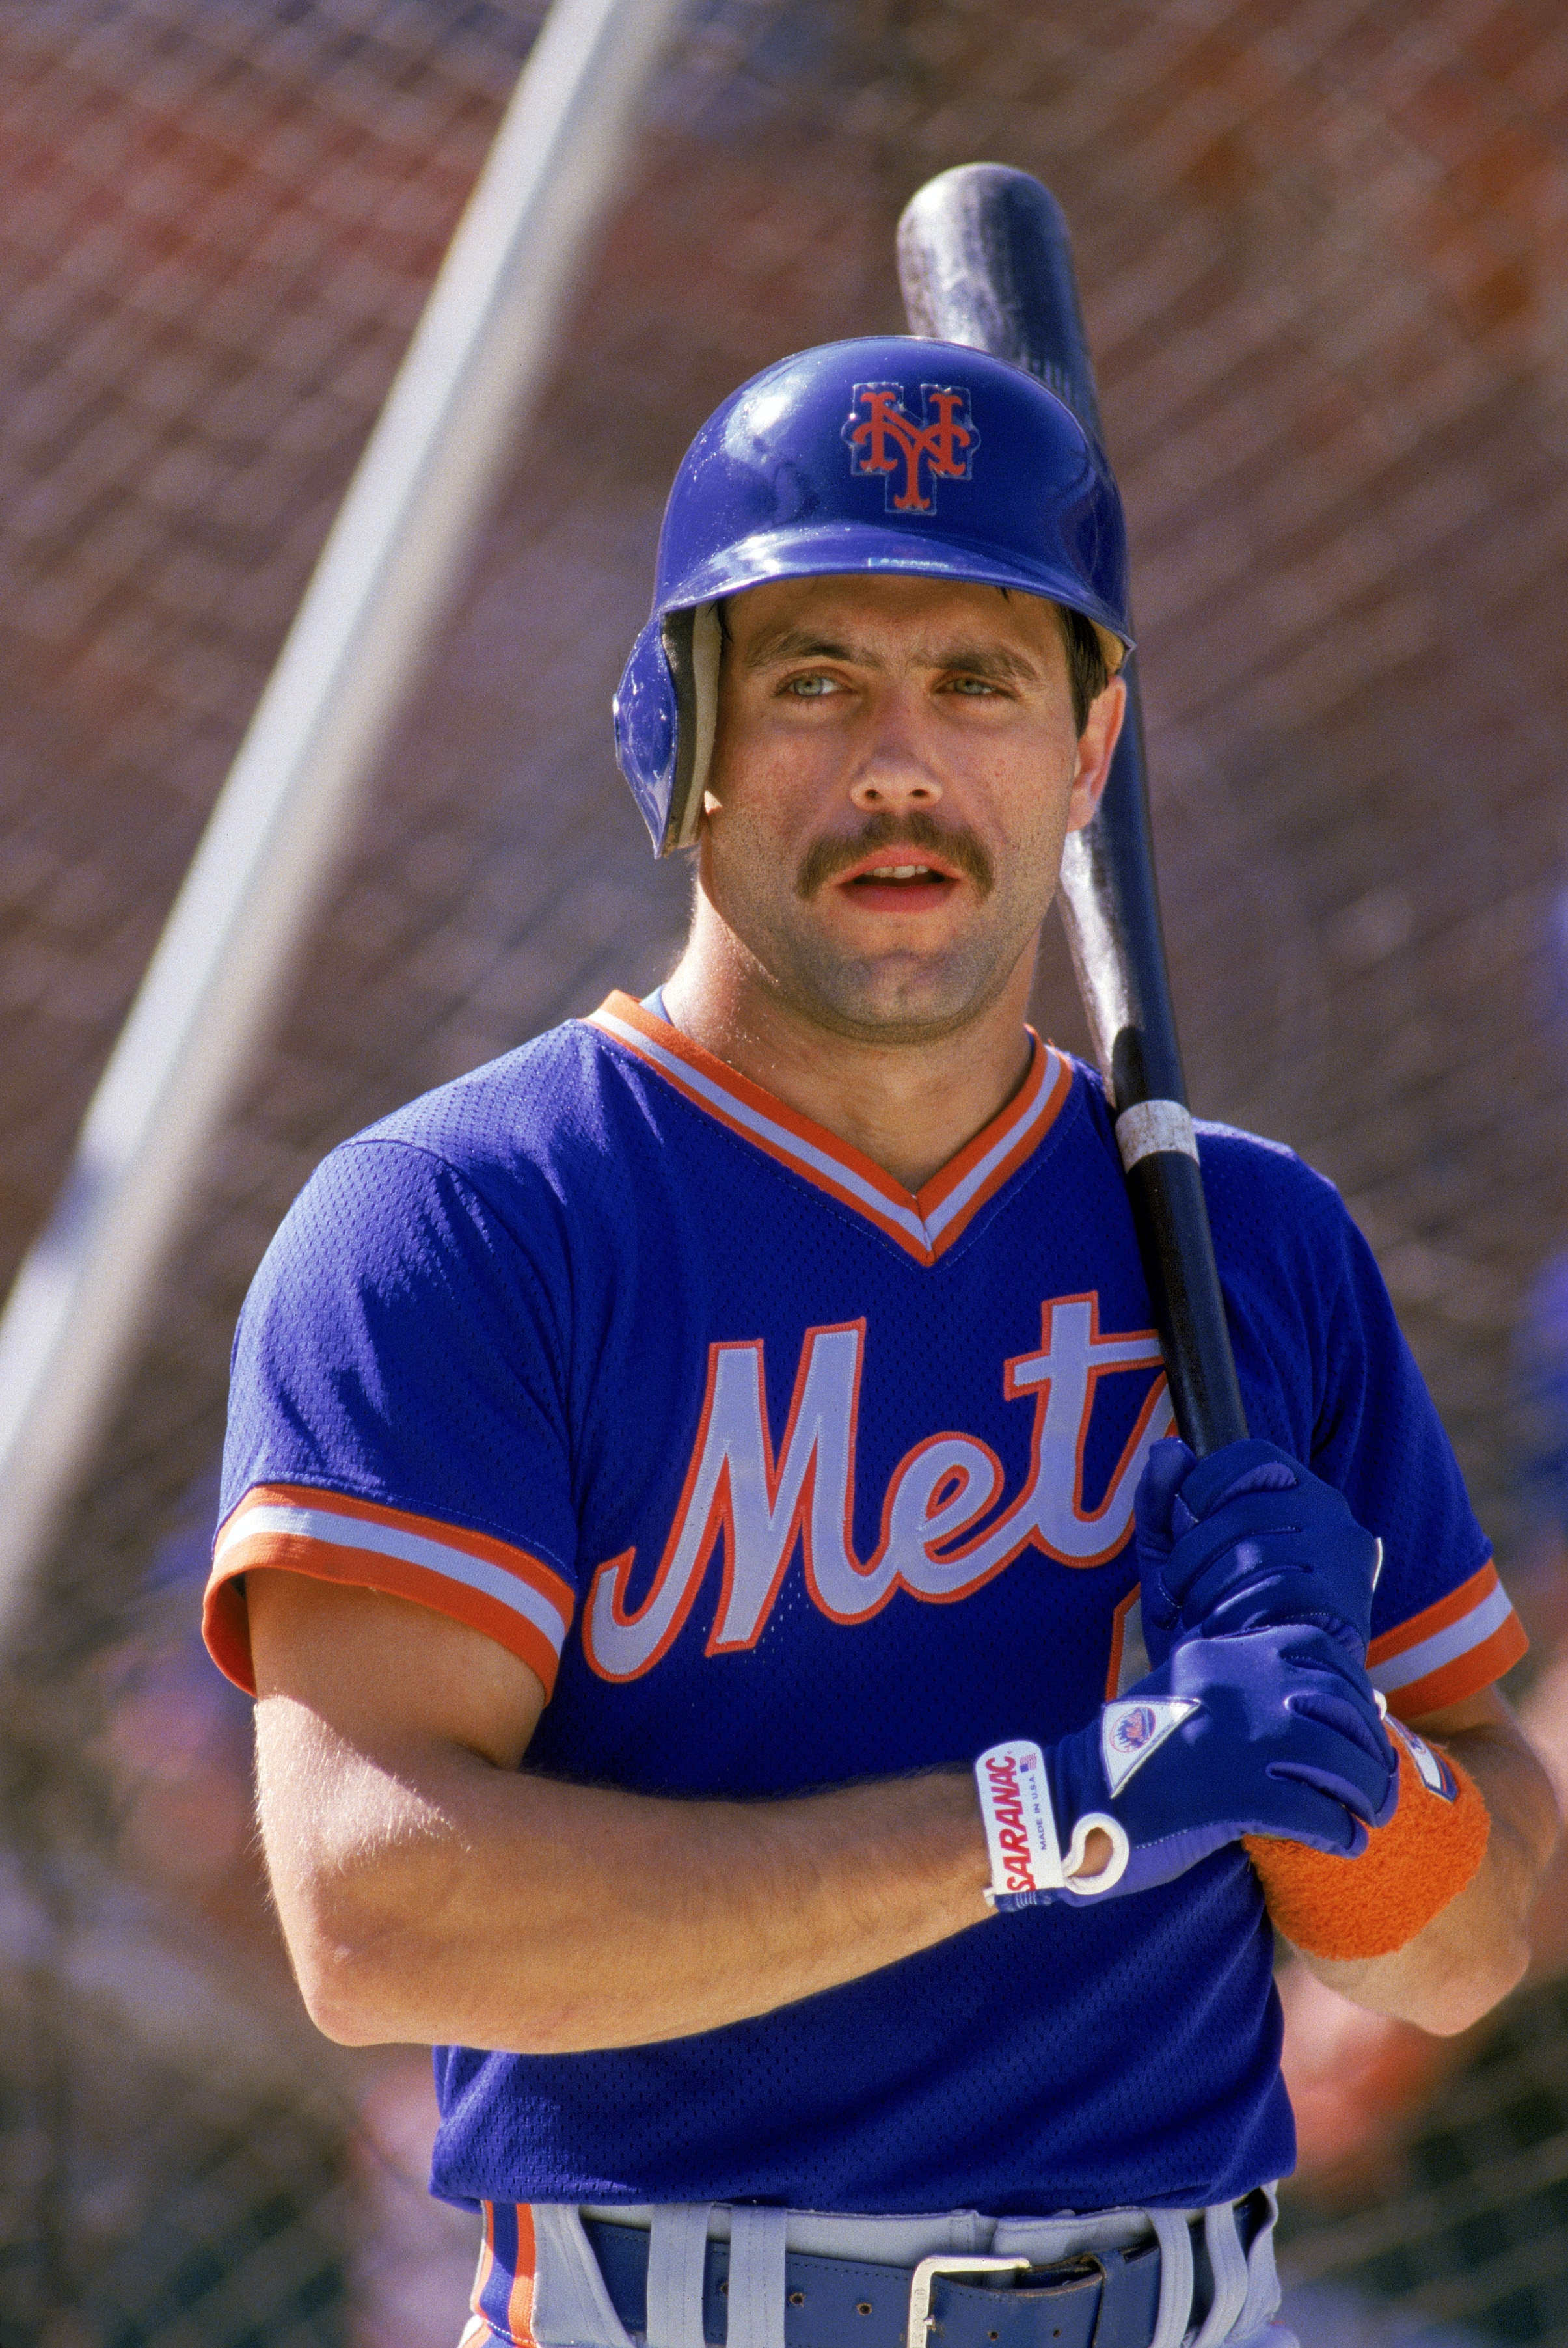 1986:  Wally Backman #6 of the New York Mets looks on during the game against the San Diego Padres at Jack Murphy Stadium circa 1986 in San Diego, California.  (Photo by Rick Stewart/Getty Images)